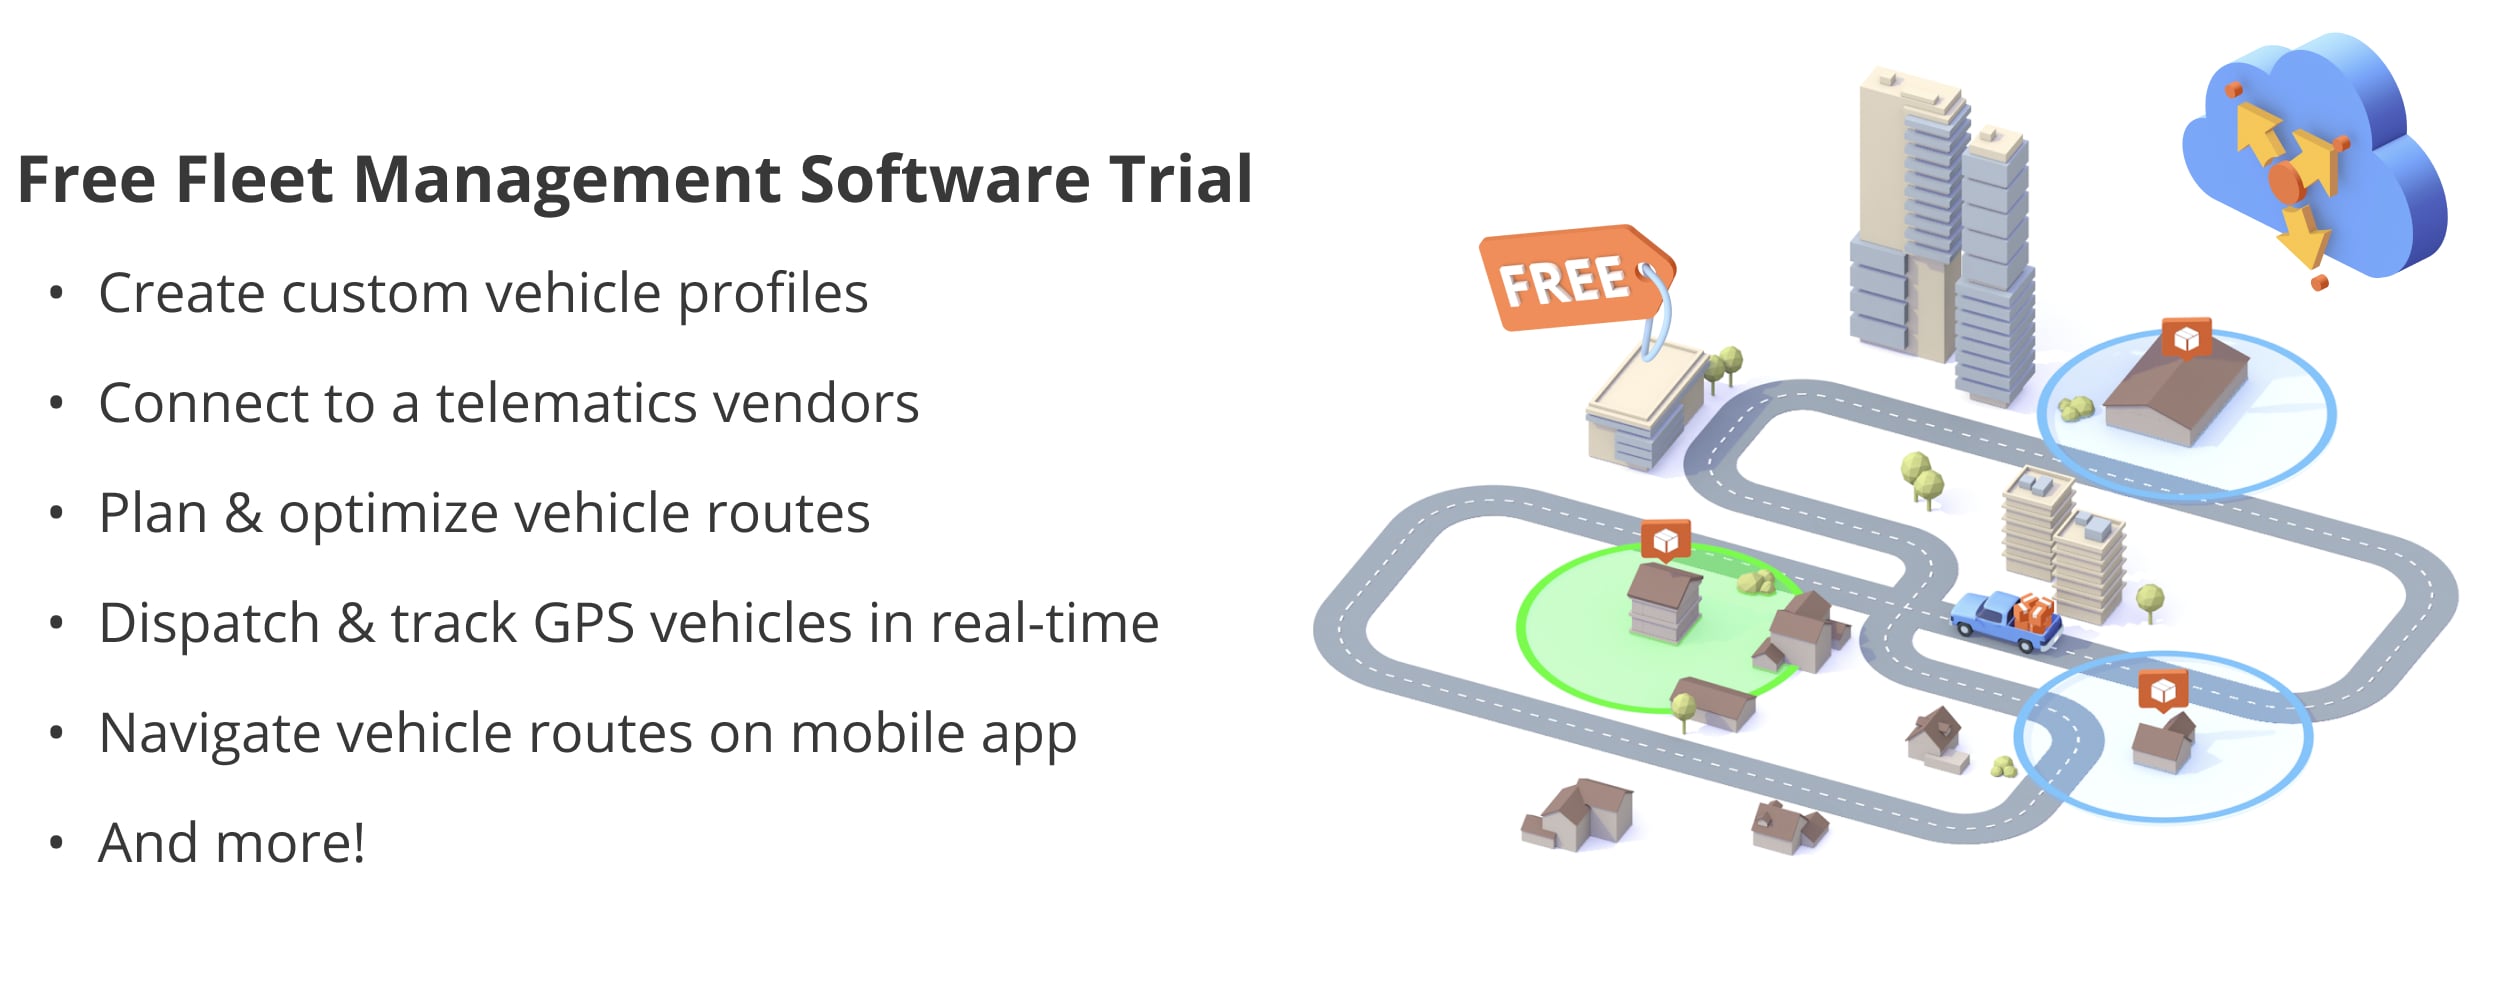 Free fleet management software trial for new Route4Me users.